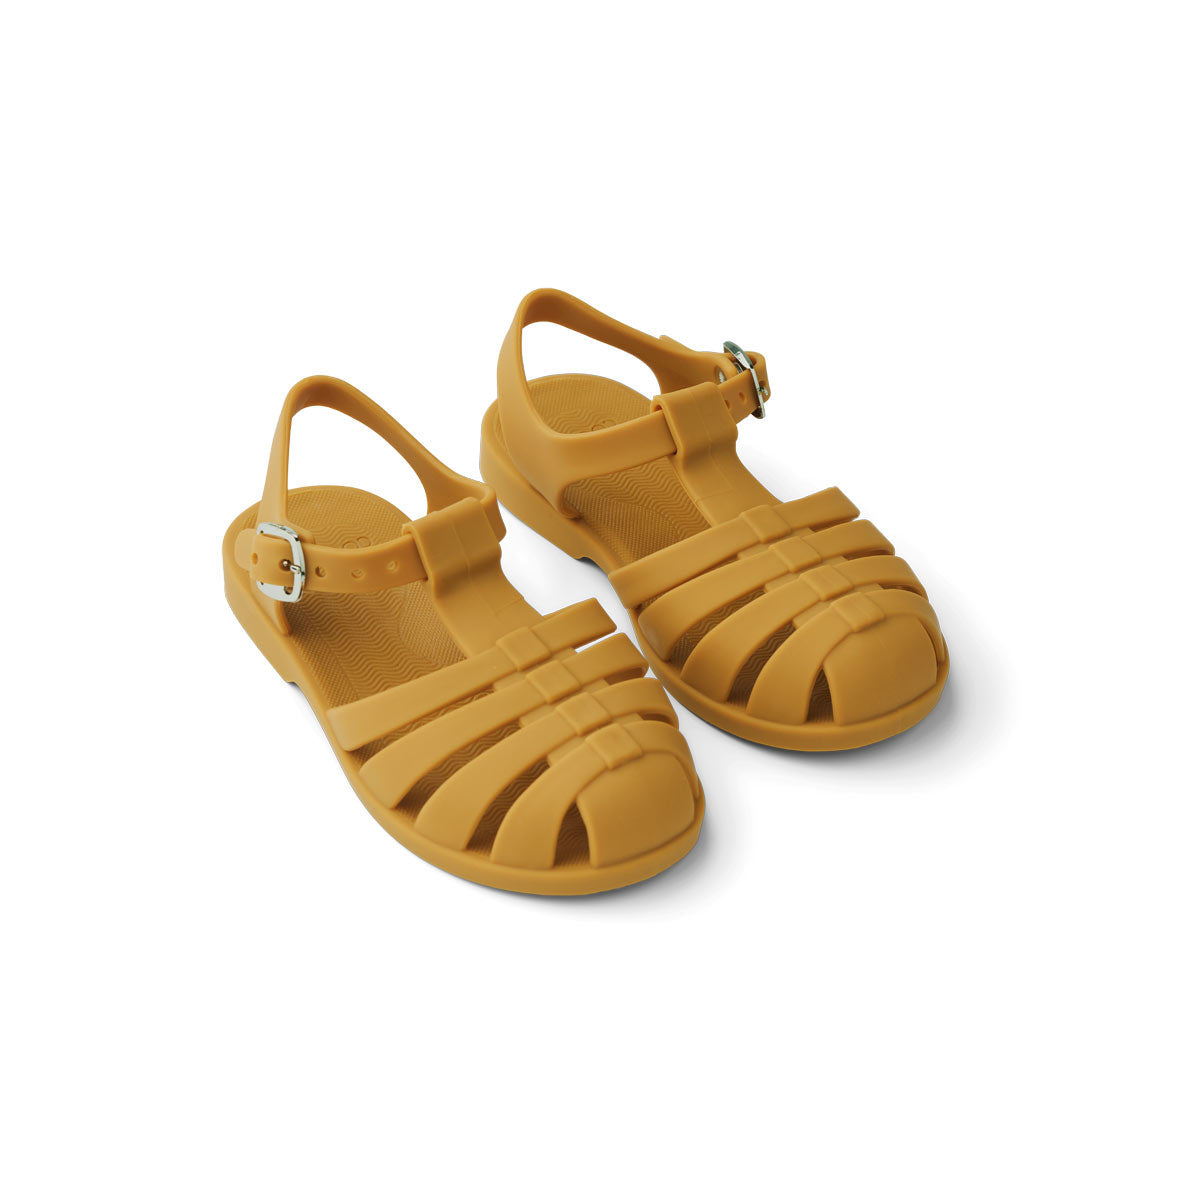 The Liewood Kids Bre Sandals in the lovely golden  caramel colour are available from Alf & Co, the children’s independent 